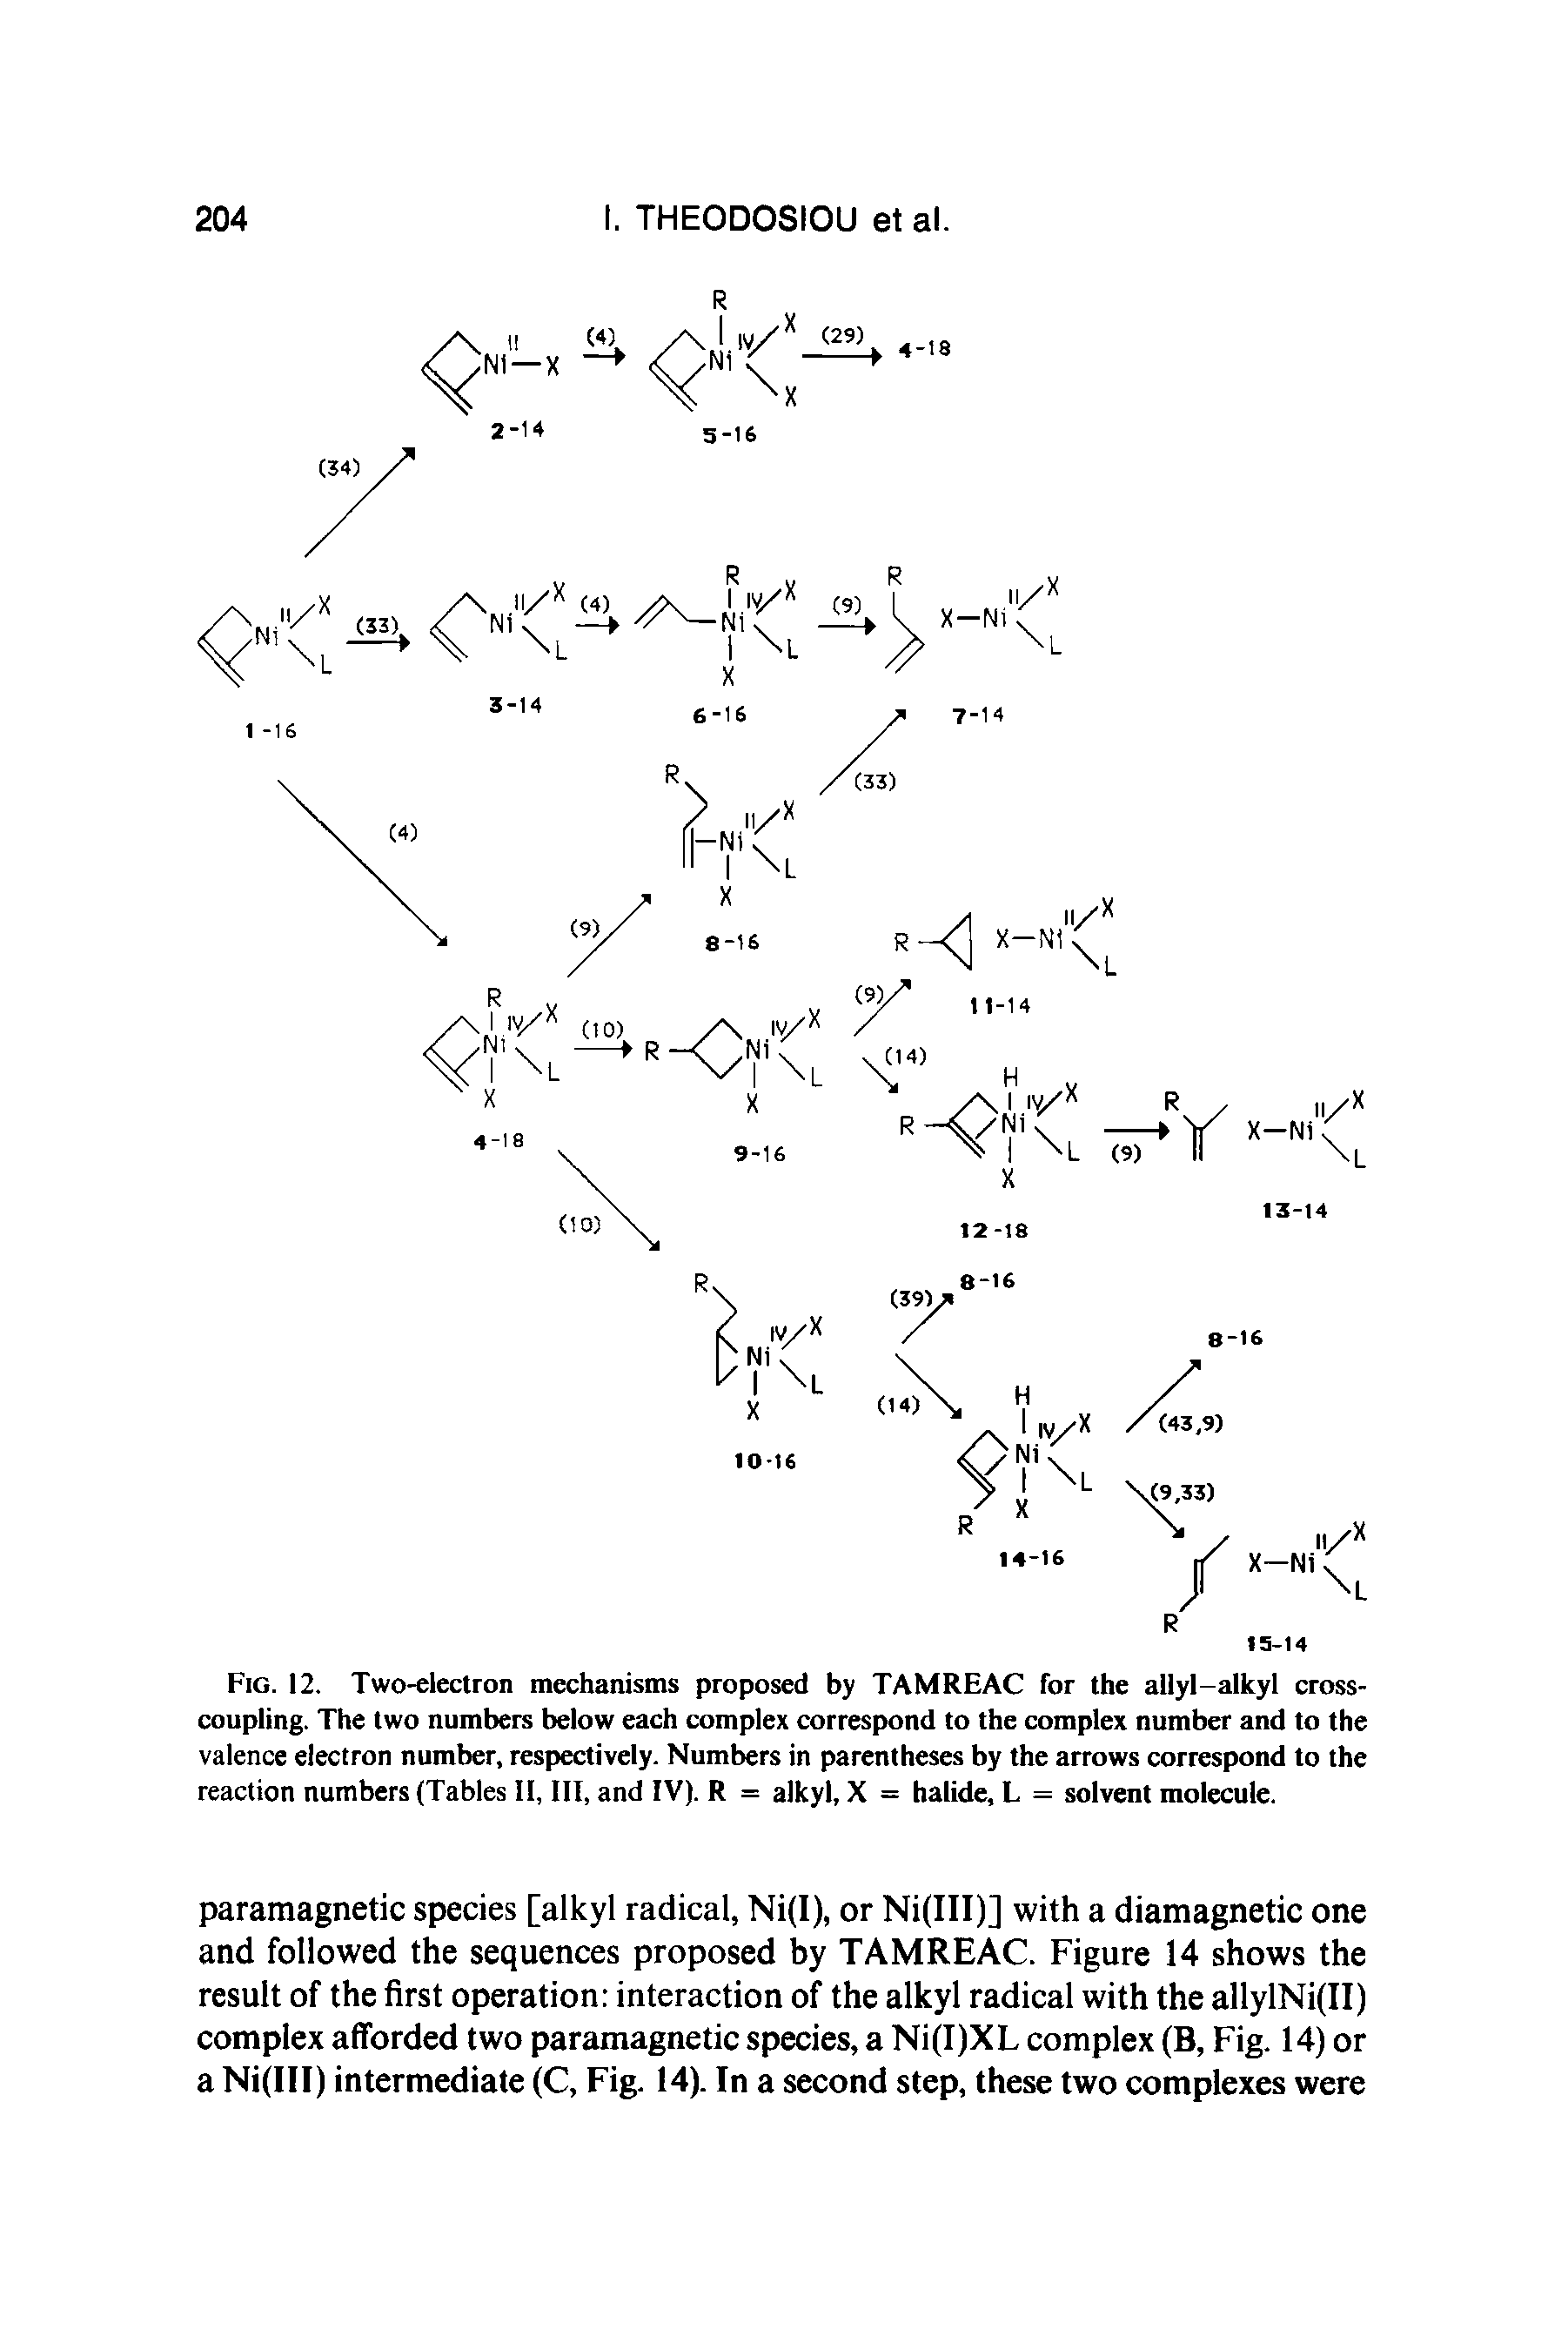 Fig. 12. Two-electron mechanisms proposed by TAMREAC for the allyl-alkyl cross-coupling. The two numbers below each complex correspond to the complex number and to the valence electron number, respectively. Numbers in parentheses by the arrows correspond to the reaction numbers (Tables II, III, and IV). R = alkyl, X = halide, L = solvent molecule.